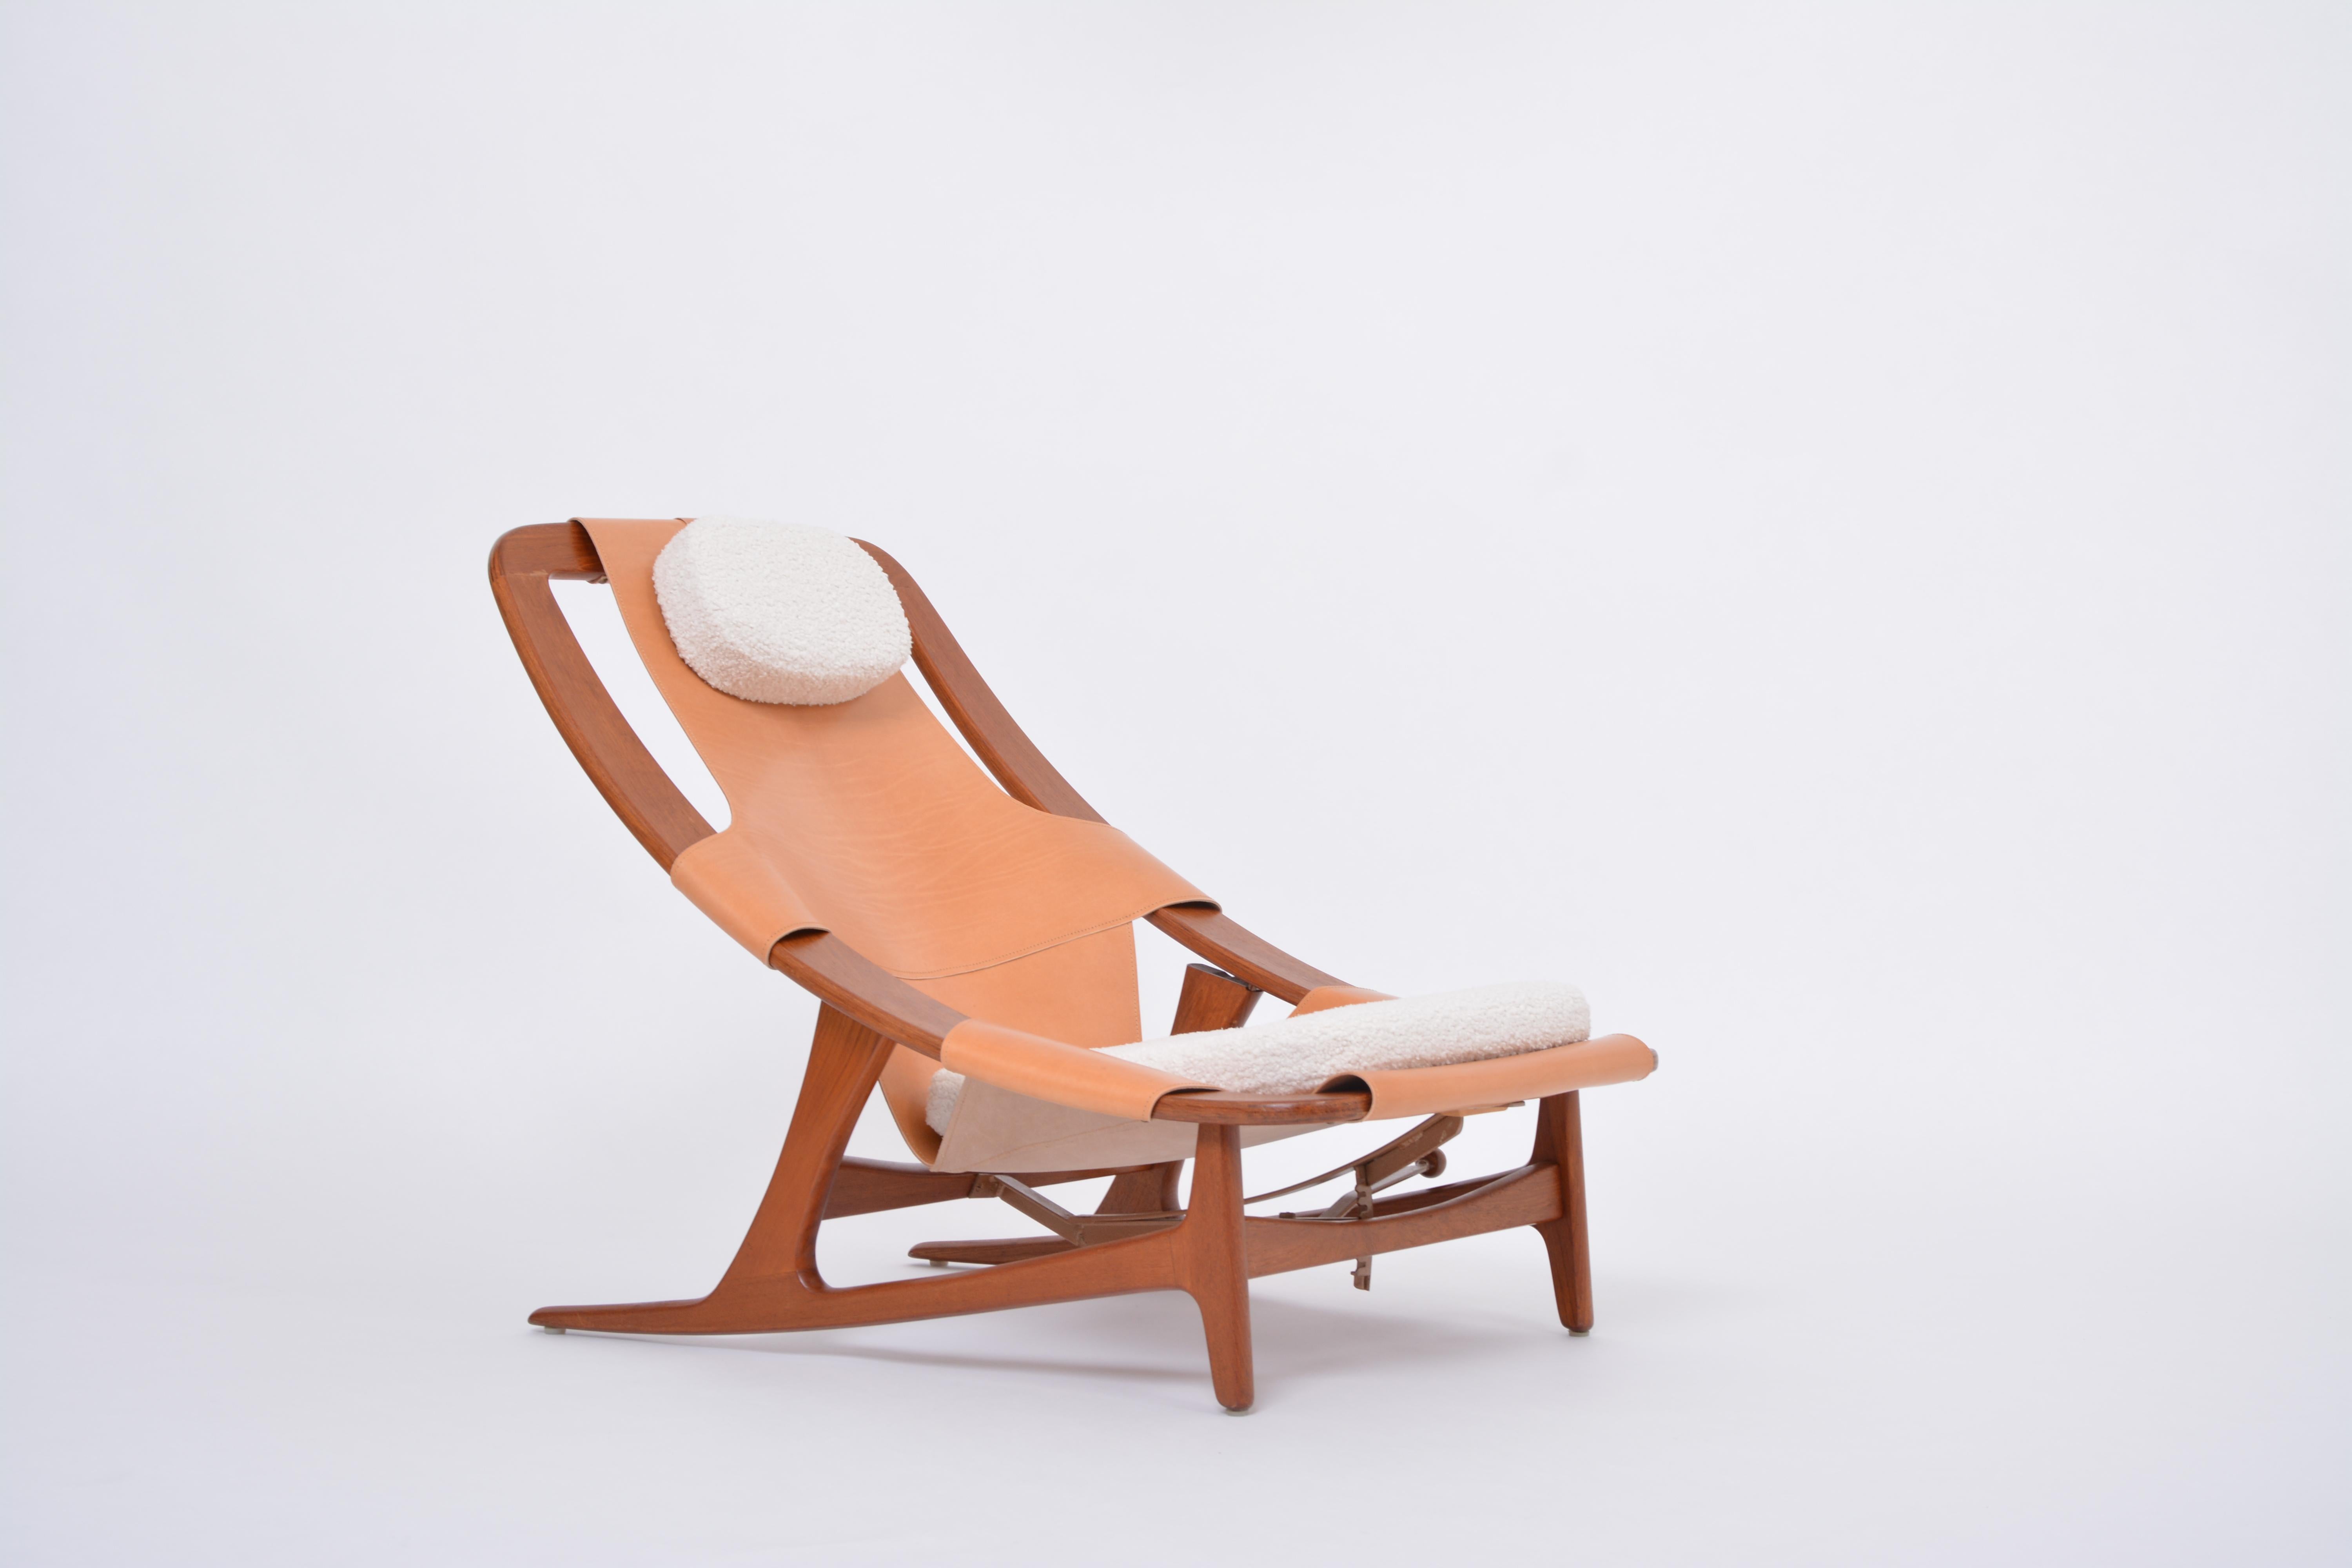 This low lounge chair was designed by Arne Tidemand Ruud in 1959 and was produced by Norwegian company Norcraft. An absolutely stunning and outstanding piece of Scandinavian Midcentury Modern design. Not only is this piece amazingly beautifully